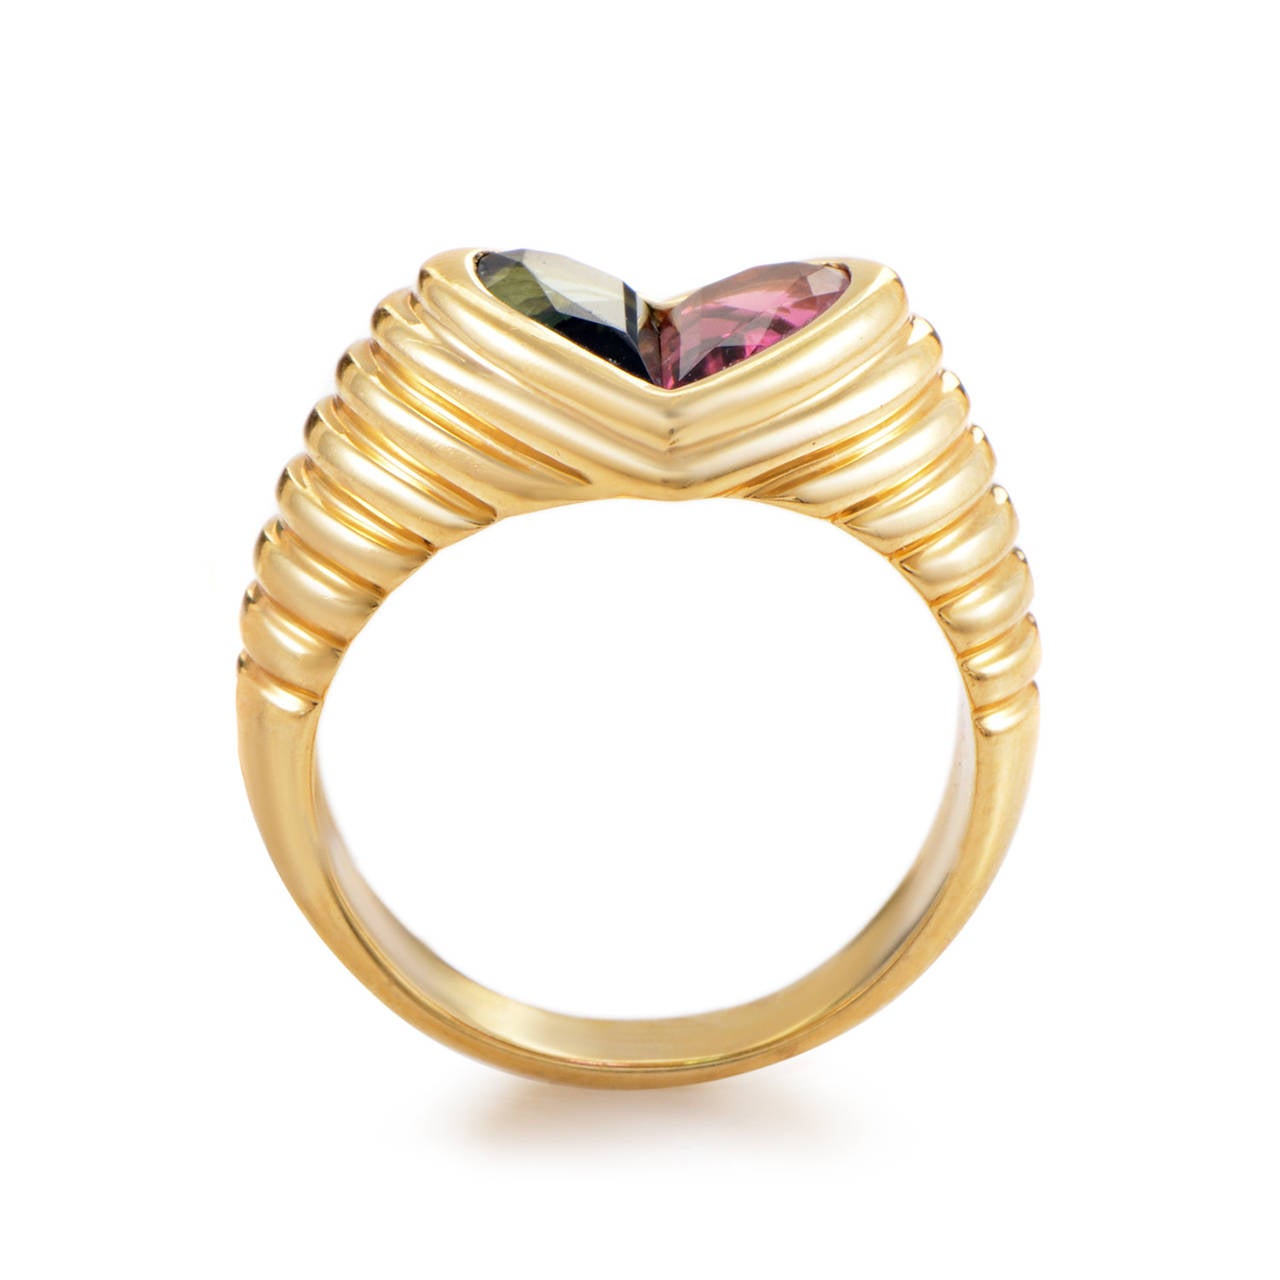 Take your fashion to the next level with this simple yet stylish Bulgari 18K yellow gold diamond ring. Adorned with most dazzling green and pink tourmaline stones, this ring will make you stand out in the crowd.
Included Items: Manufacturer's